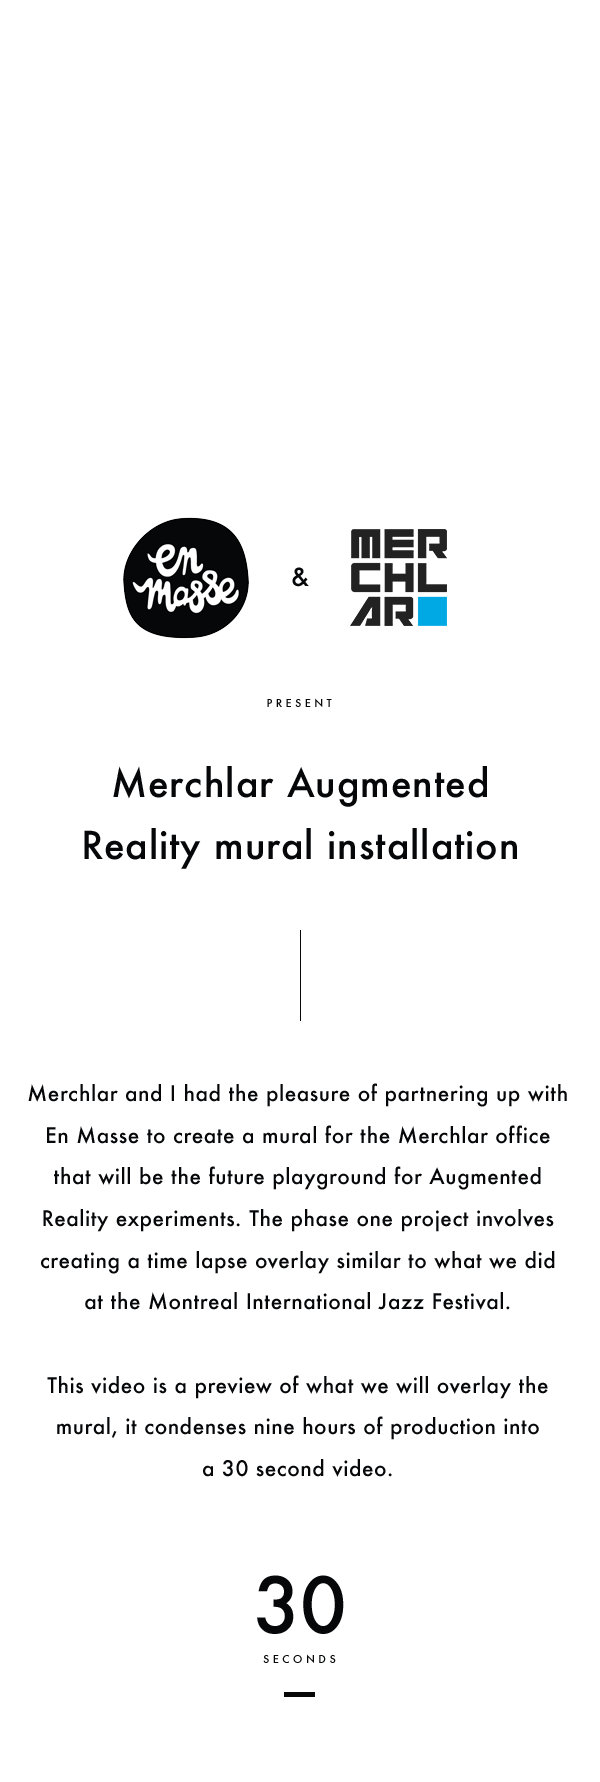 en masse Merchlar augmented reality AR Mural Graffity black and white arts PERFORMING iphone